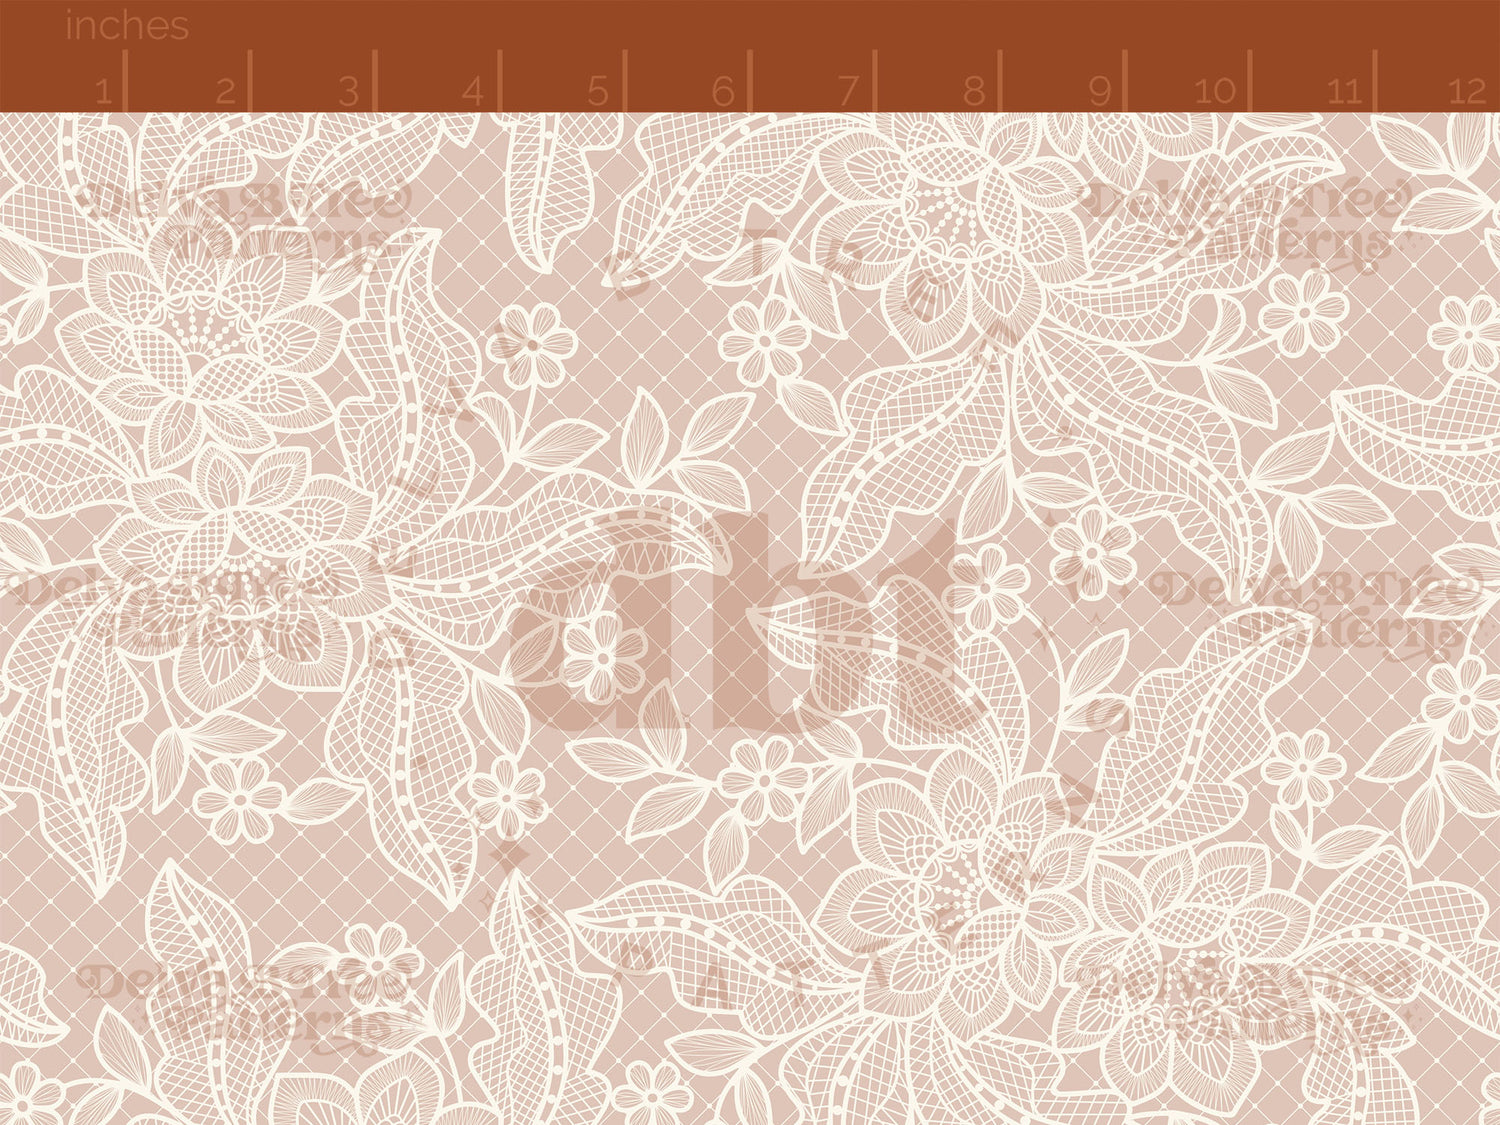 Off white flowers, leaves and faux lace netting on a blush pink background seamless pattern scale digital file for small shops that make handmade products in small batches.